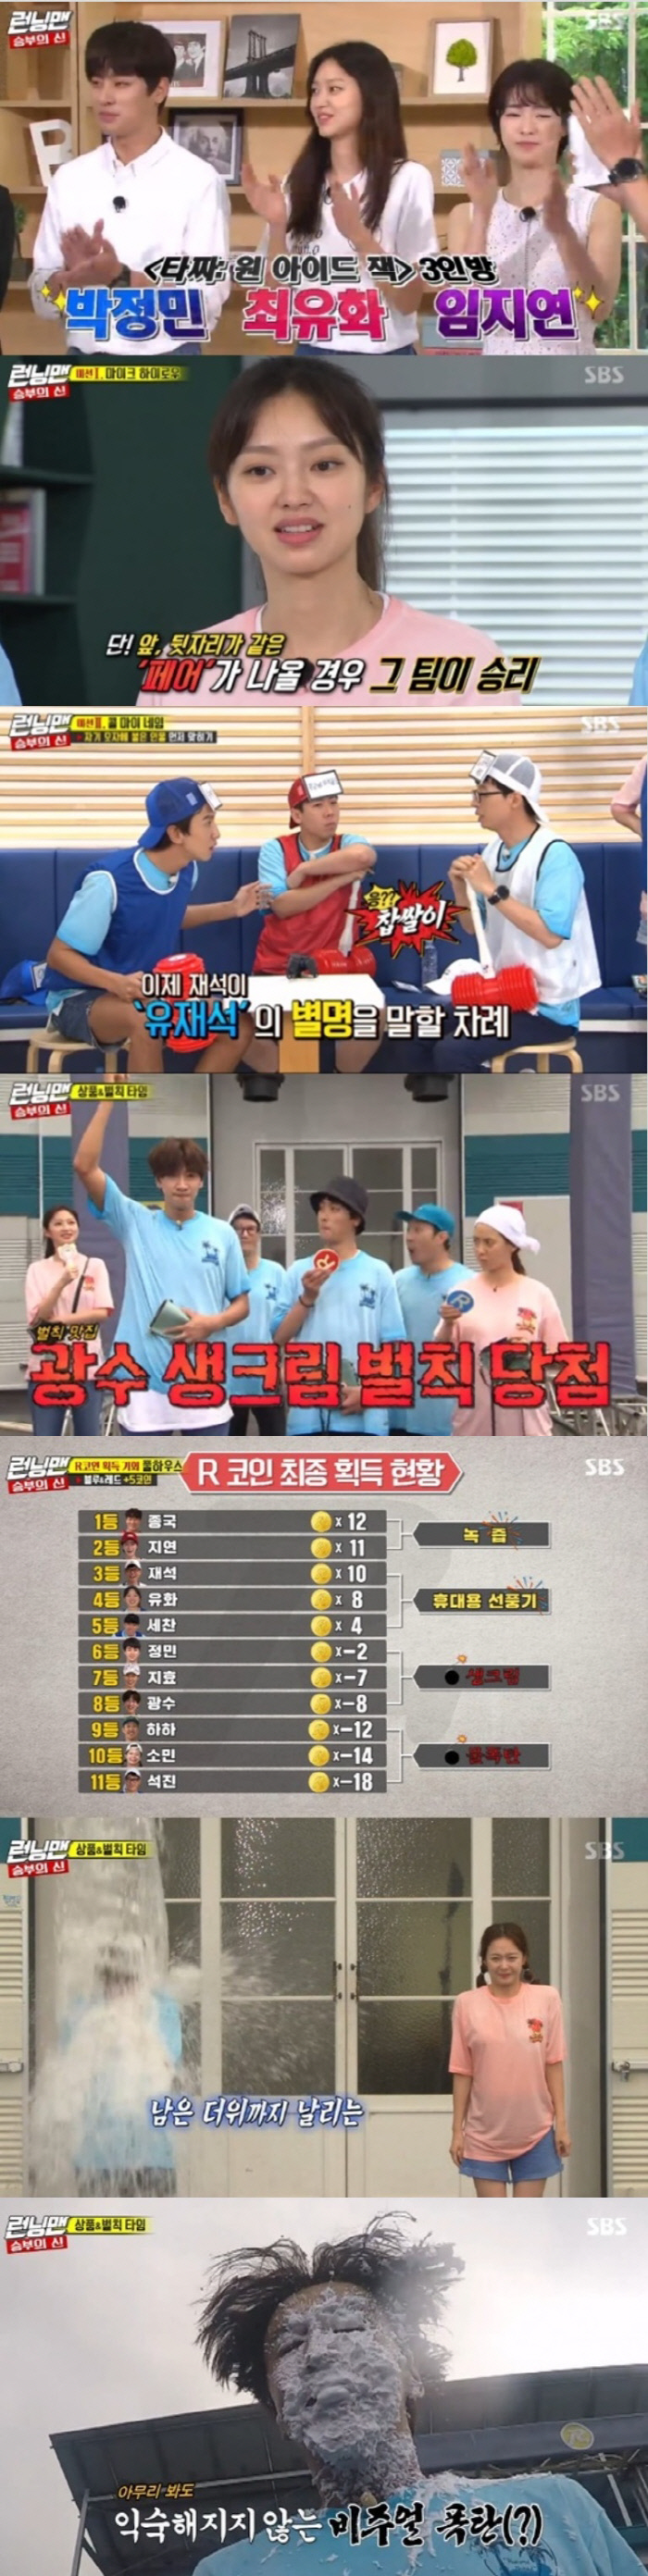 SBS Running Man took the top spot in the same time zone of 2049 target audience rating.According to Nielsen Korea, a ratings agency, Running Man, which was broadcast on the 25th (Sun), recorded 3.6% of the 2049 target audience rating (based on the second part of the audience rating of households in the metropolitan area), which is an important indicator of major advertising officials.The show was decorated with the God of Victory Race and featured actors Park Jung-min, Lim Ji-yeon and Choi Yoo-hwa of the movie Tazza: The High Rollers3: One Eyed Jack, and comedian Ji Suk-jin and actor Jeon So-min appeared under the opening make-up penalty from the beginning.Ji Suk-jin transformed the movie With God to the great king, and Jeon So-min transformed into the direct shot of the movie Saw and laughed.On this day, Race became a more intense race with a solo exhibition, and the last mission covered the results through a full house game.The scene was the highest audience rating of 7.6% per minute, accounting for the best one minute.With a large number of penalties, Lee Kwang-soo received a fresh cream bomb, Haha and Jeon So-min received a water bomb penalty.SBS Running Man is broadcast every Sunday at 5 pm.On the other hand, Running Man will hold a long-awaited 9th anniversary fan meeting Running District at Ewha Womans University Auditorium at 7 pm on Monday 26th.